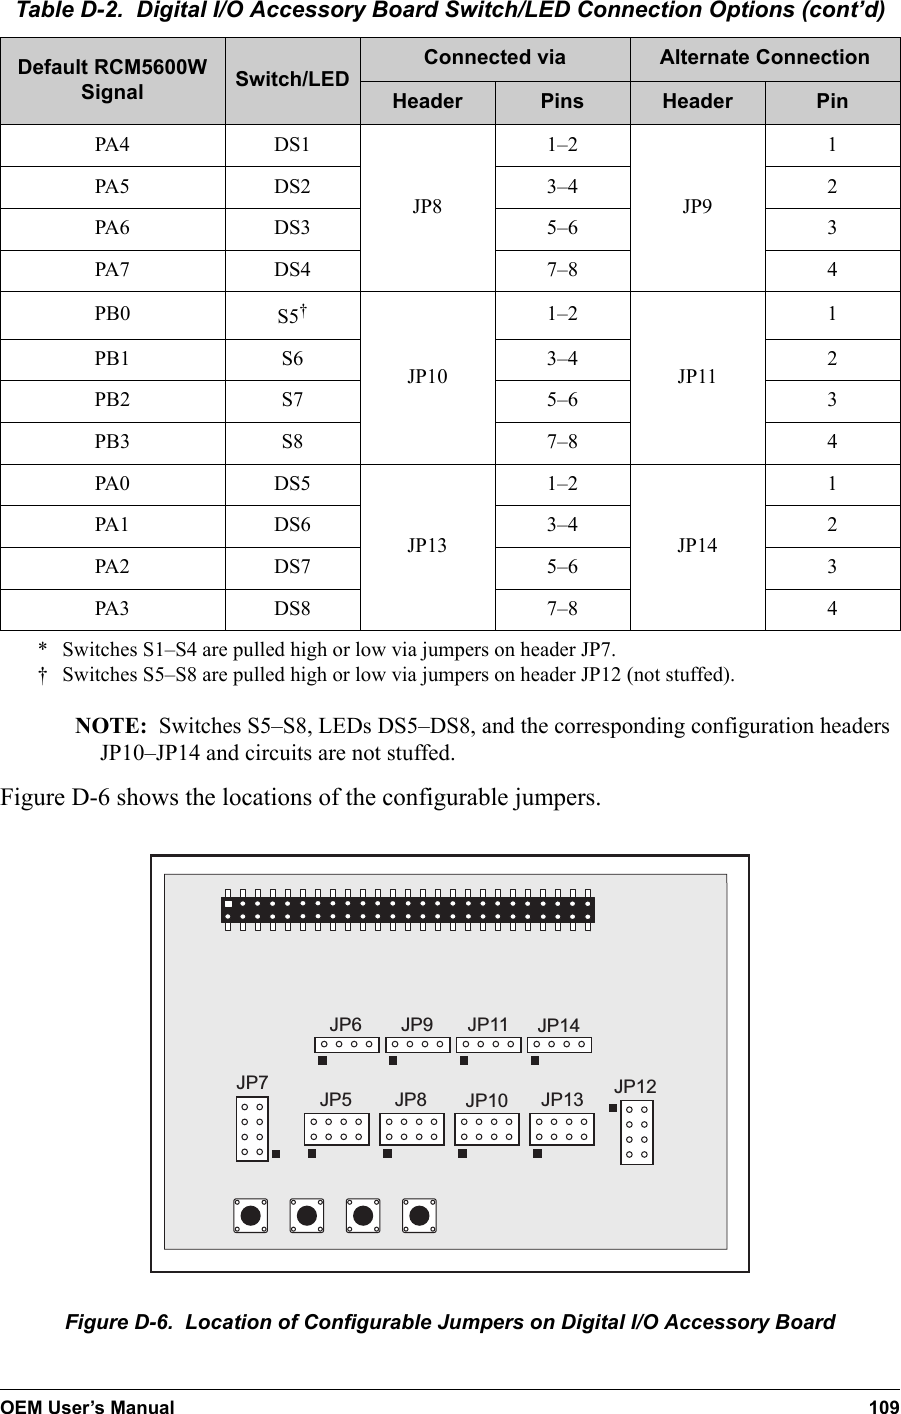 OEM User’s Manual 109NOTE: Switches S5–S8, LEDs DS5–DS8, and the corresponding configuration headers JP10–JP14 and circuits are not stuffed.Figure D-6 shows the locations of the configurable jumpers.JP7 JP5 JP8 JP10 JP13 JP12JP6 JP9 JP11 JP14Figure D-6.  Location of Configurable Jumpers on Digital I/O Accessory BoardPA4 DS1JP81–2JP91PA5 DS2 3–4 2PA6 DS3 5–6 3PA7 DS4 7–8 4PB0 S5†JP101–2JP111PB1 S6 3–4 2PB2 S7 5–6 3PB3 S8 7–8 4PA0 DS5JP131–2JP141PA1 DS6 3–4 2PA2 DS7 5–6 3PA3 DS8 7–8 4* Switches S1–S4 are pulled high or low via jumpers on header JP7.† Switches S5–S8 are pulled high or low via jumpers on header JP12 (not stuffed).Table D-2.  Digital I/O Accessory Board Switch/LED Connection Options (cont’d)Default RCM5600W Signal Switch/LEDConnected via Alternate ConnectionHeader Pins Header Pin